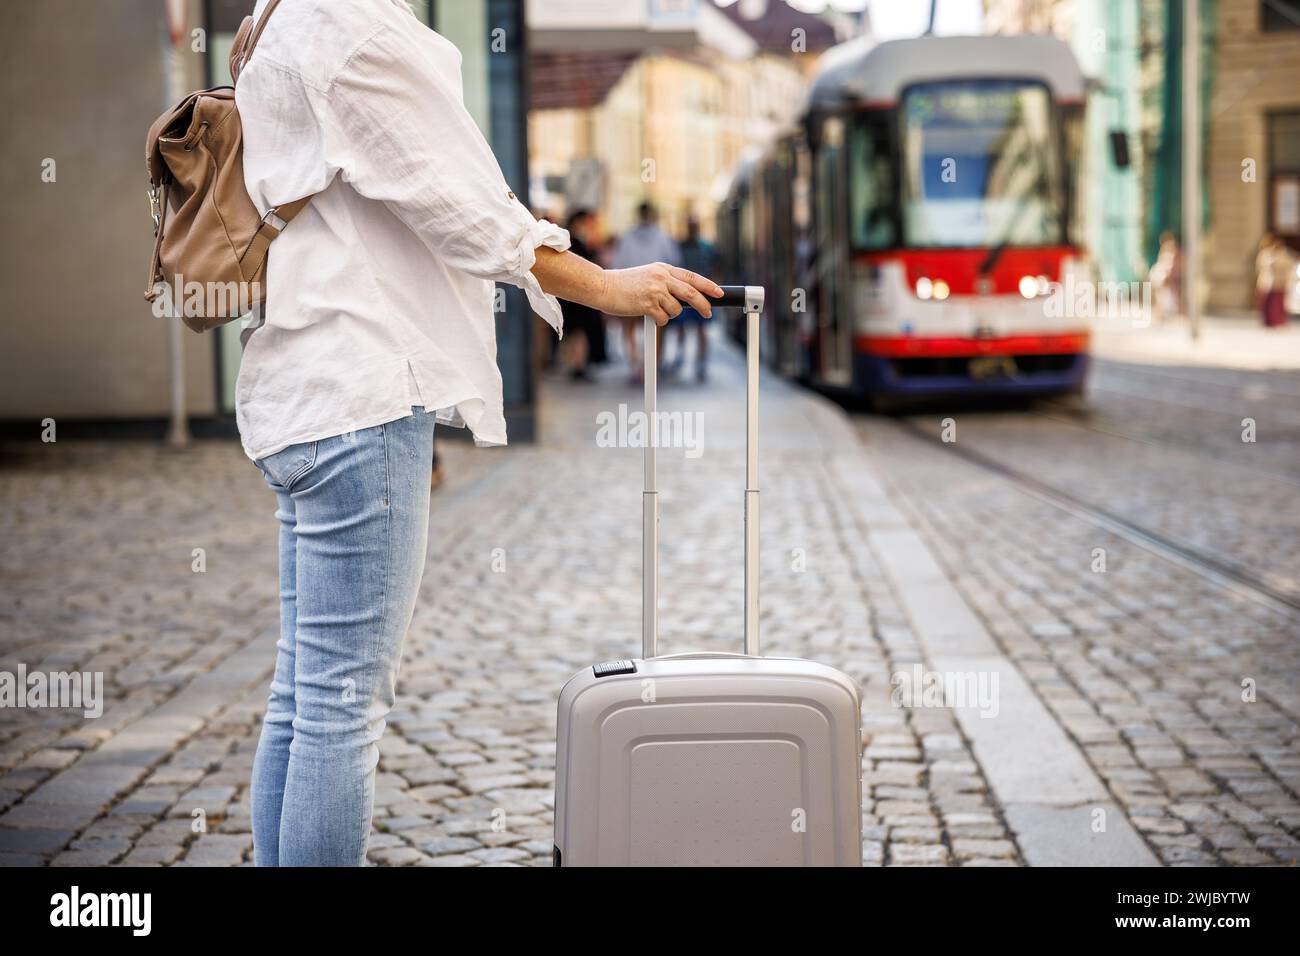 Travel by public transportation in city. Woman tourist with suitcase and backpack waiting for tram on street Stock Photo